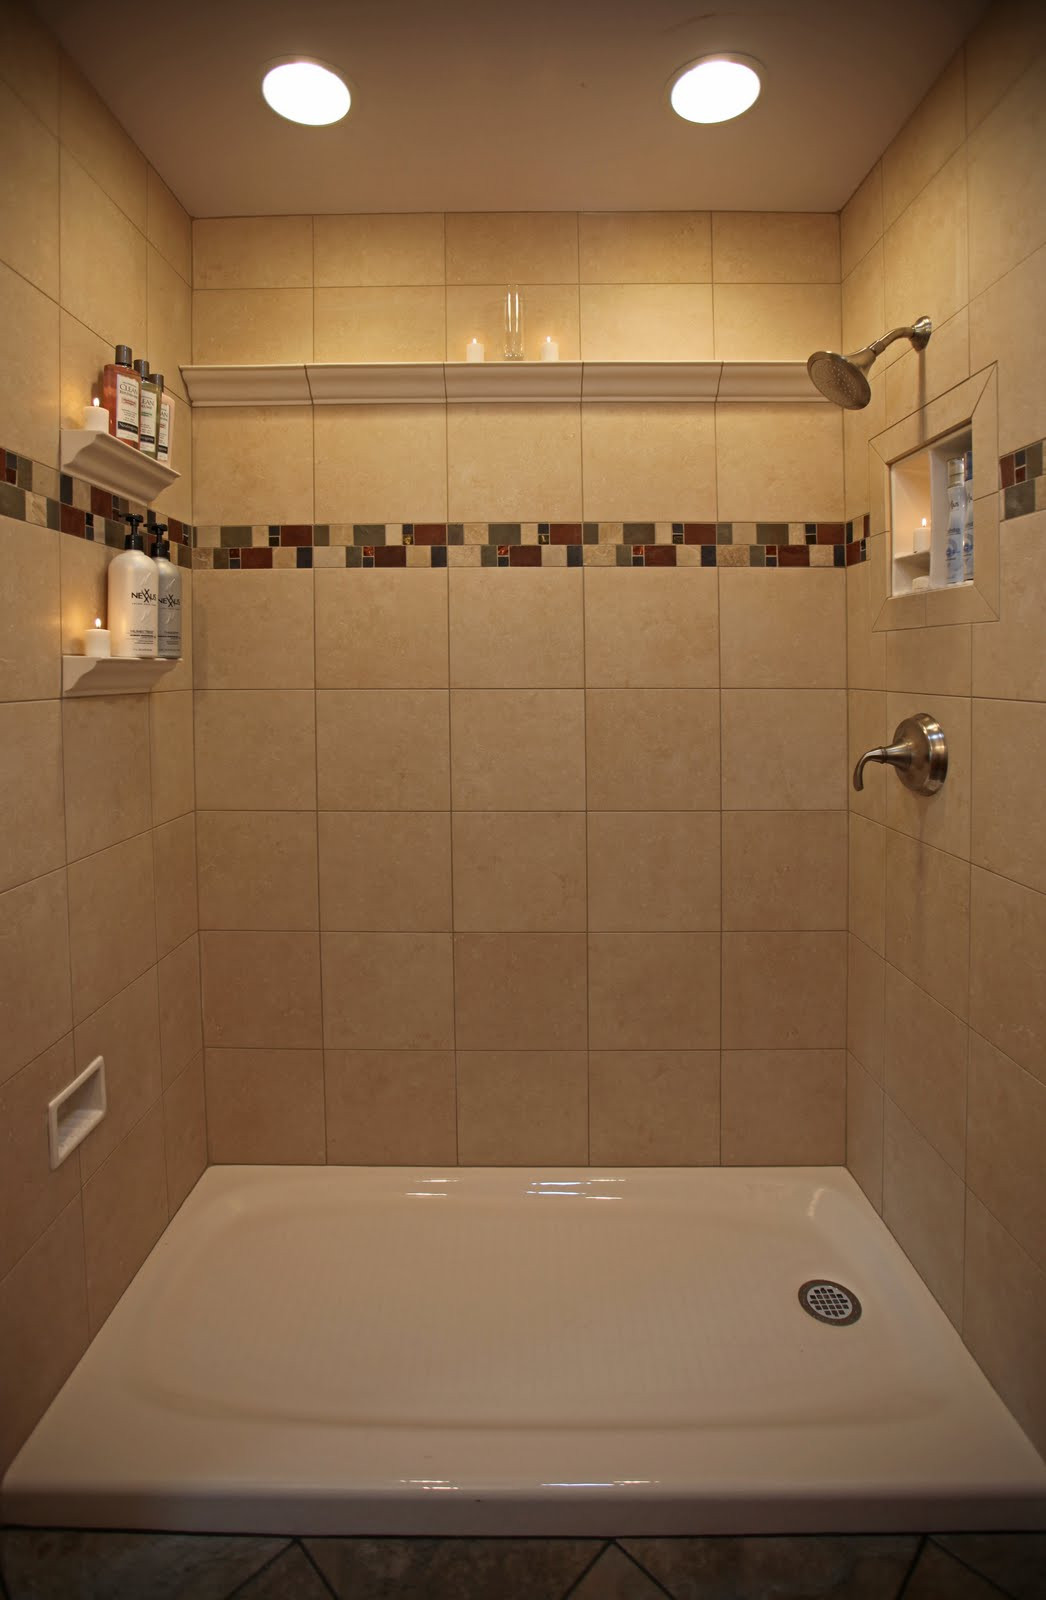 Lowes Bathroom Tile
 Bathroom Give Your Shower Some Character With New Lowes